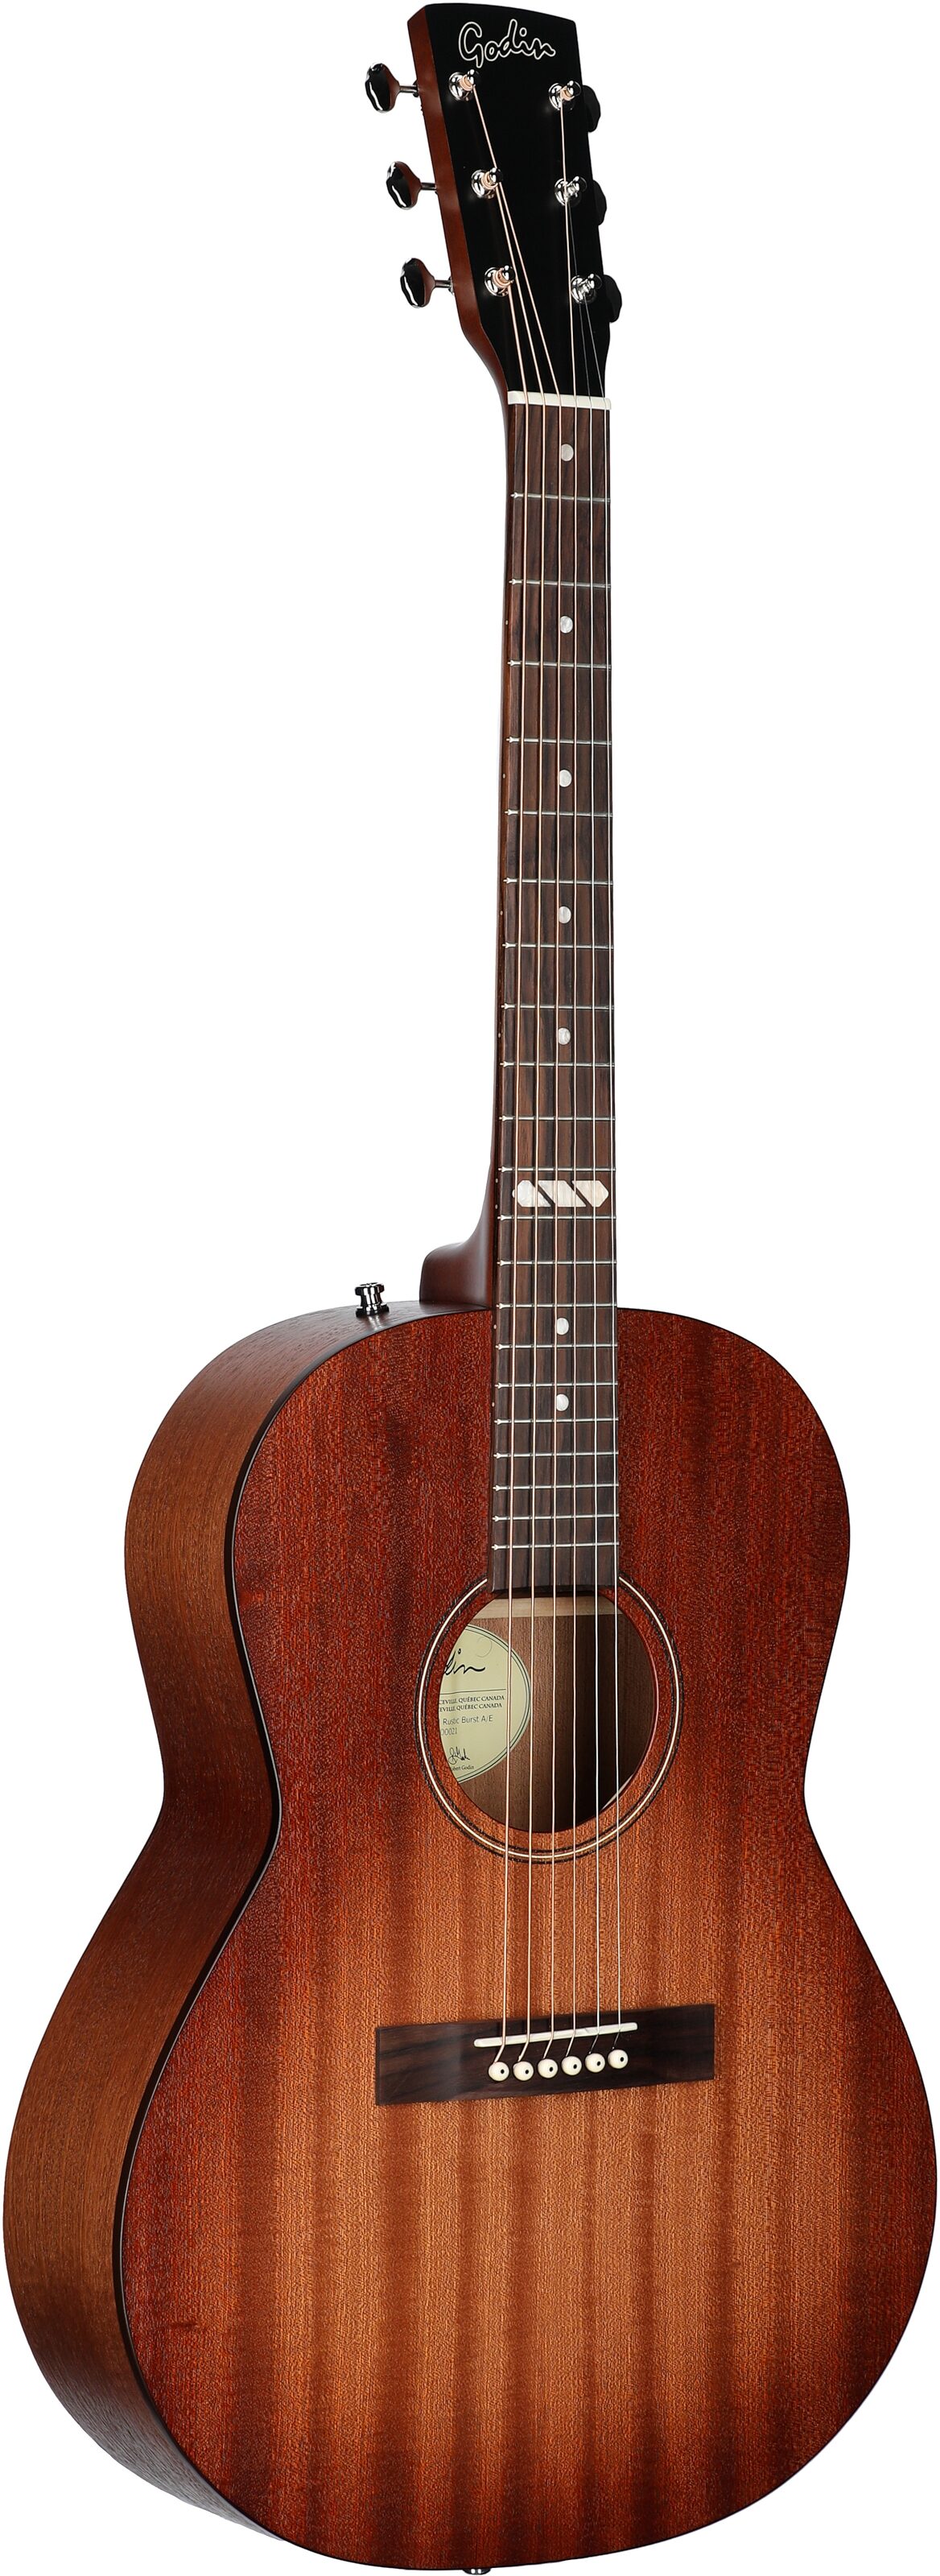 Godin 052561 Mahogany Folk Series Rustic Burst 6 String RH Acoustic  Electric Guitar - Canada's Favourite Music Store - Acclaim Sound and  Lighting